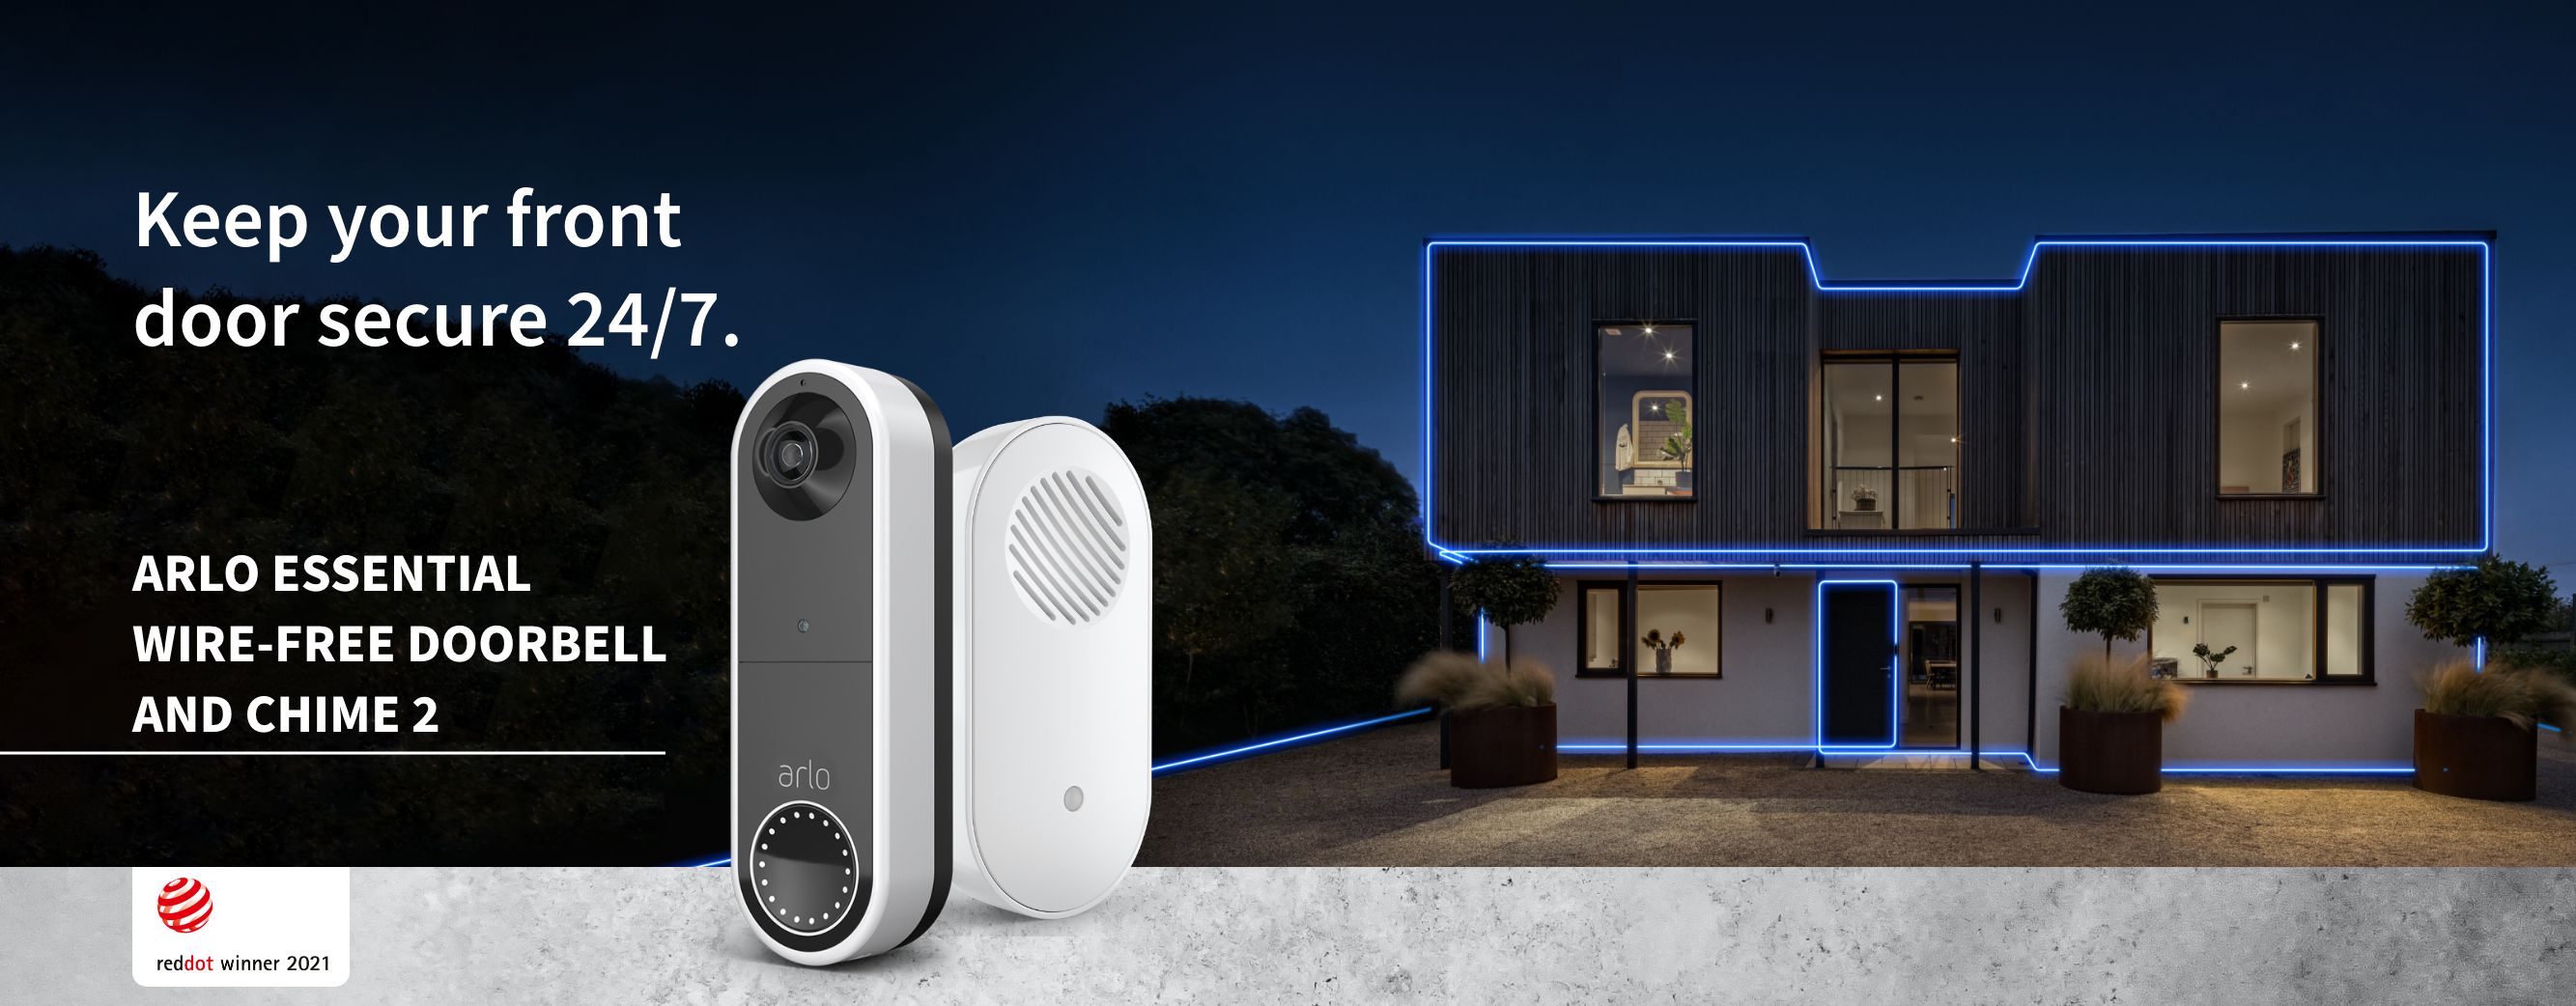 An Arlo  Essential Wire-free Doorbell and chime 2  gives you the full picture view -  Reddot winner 2021